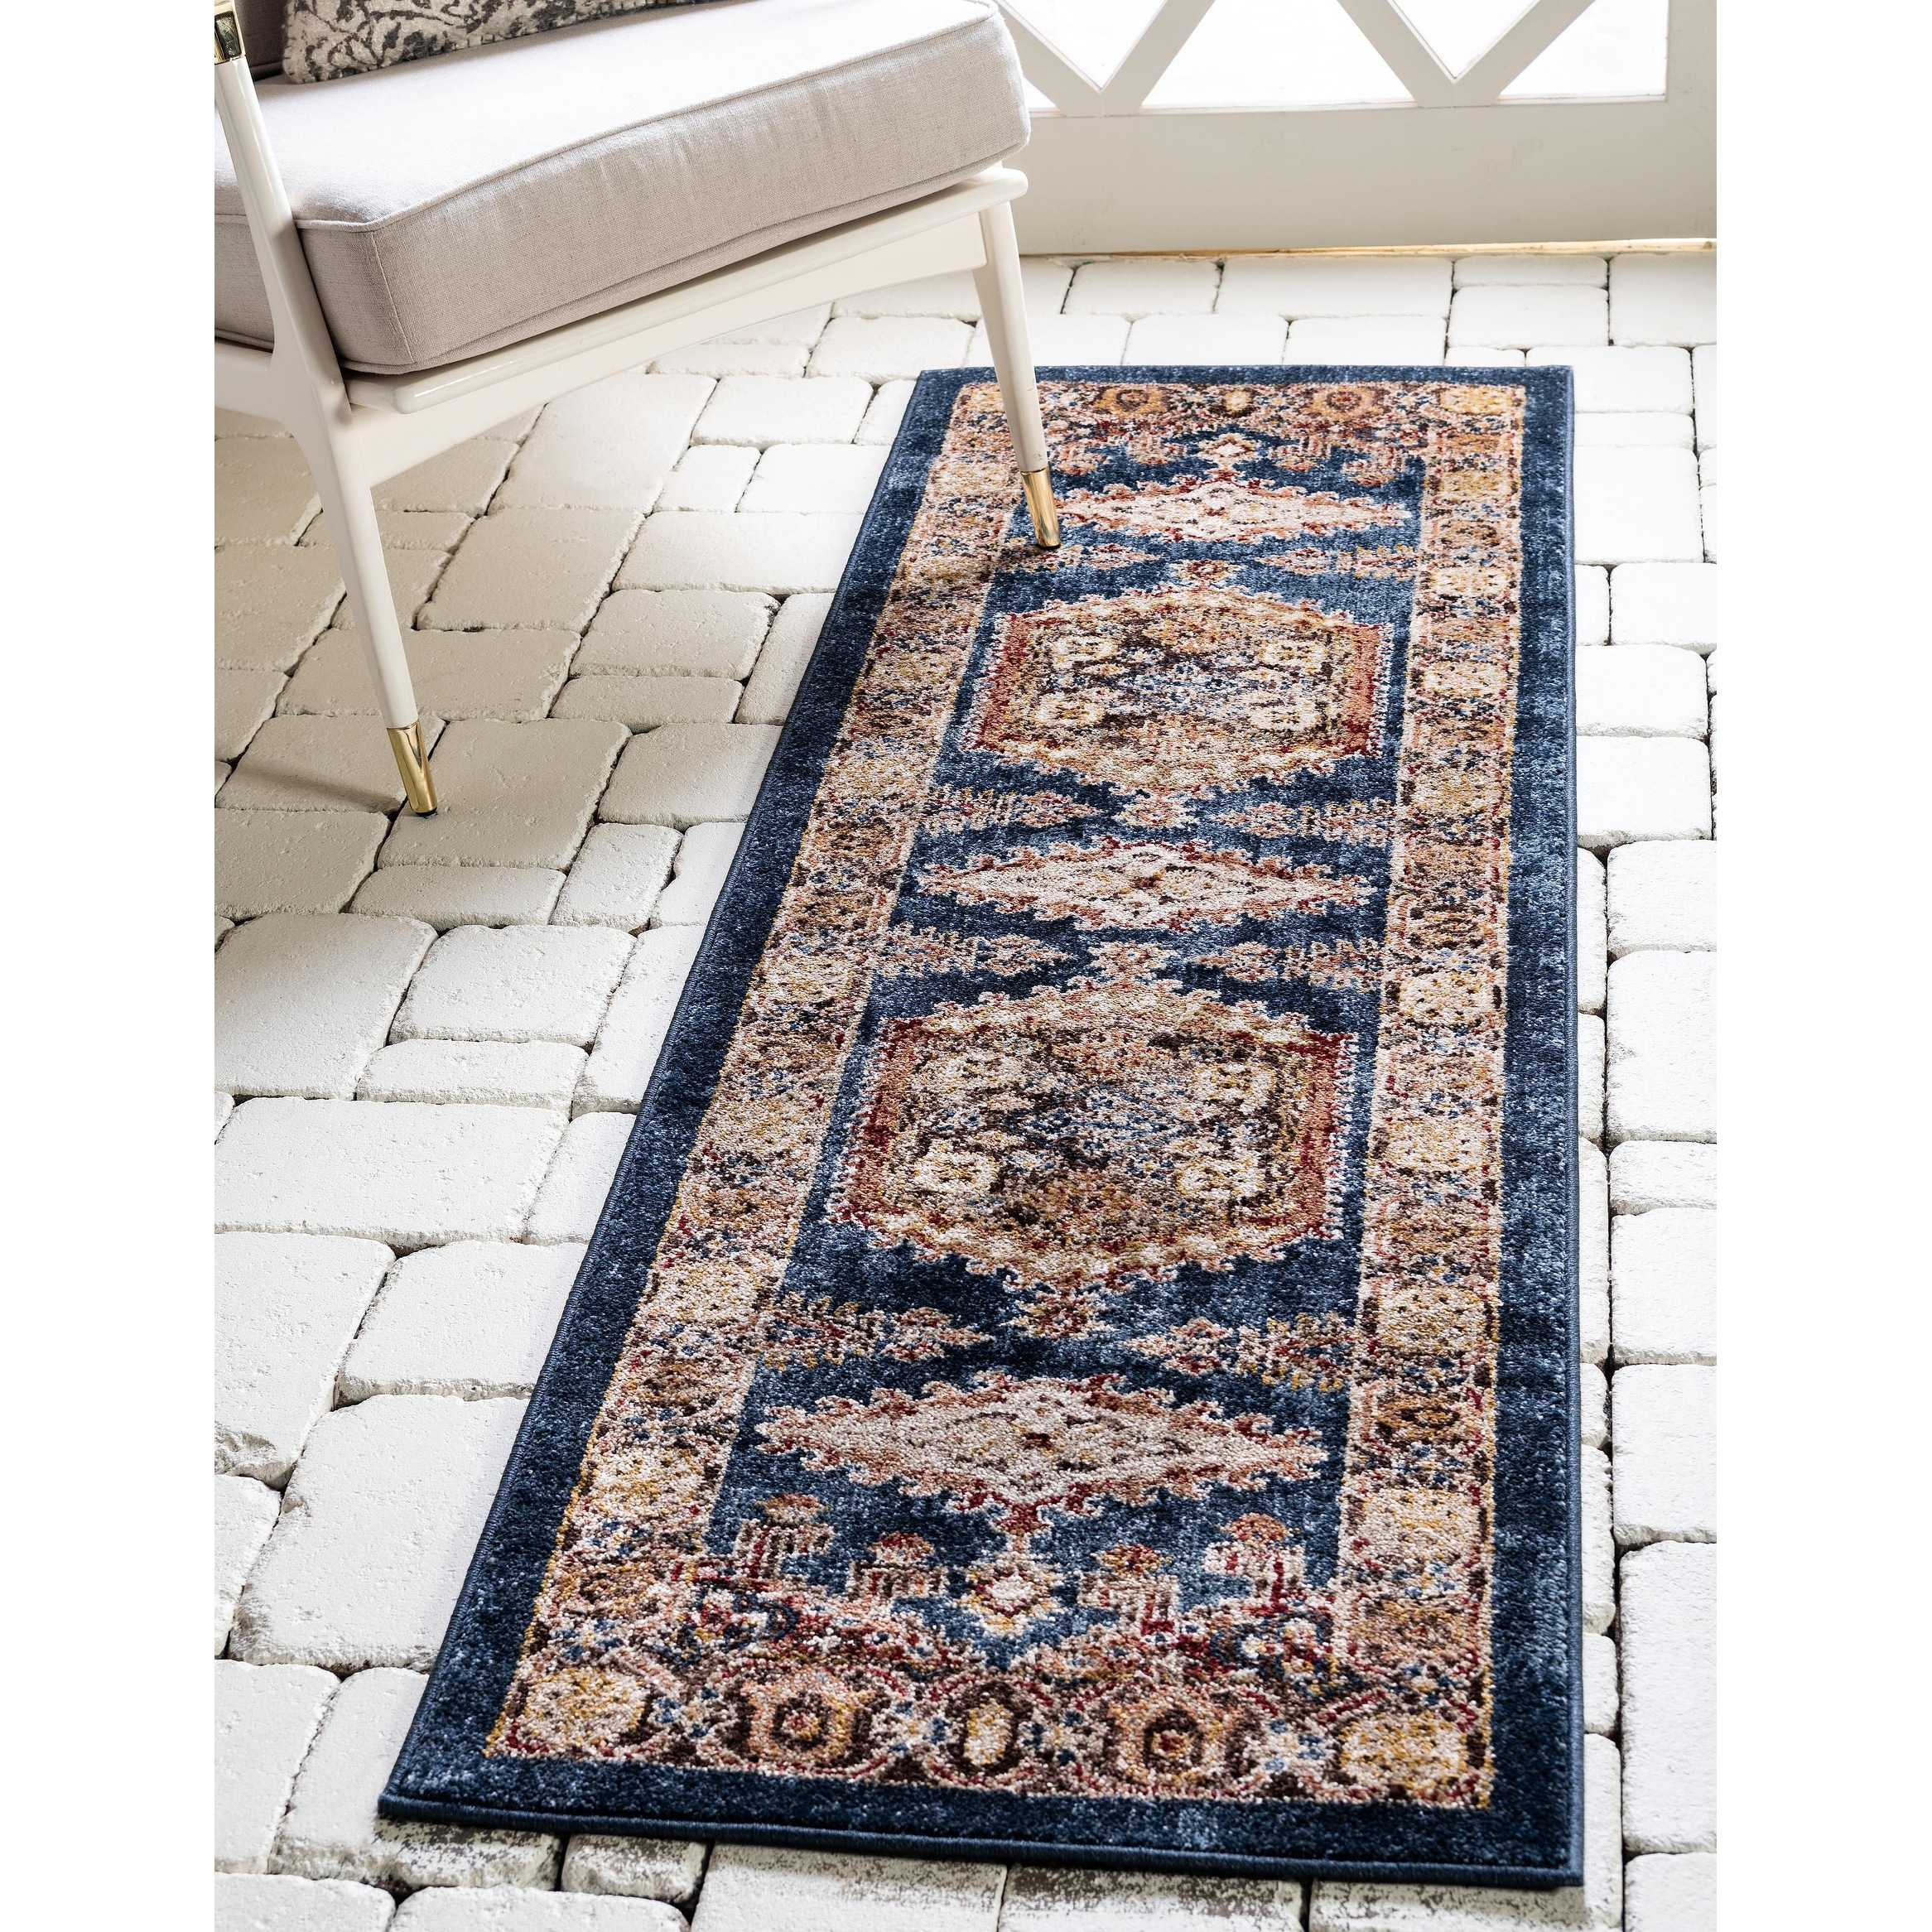 2 ft 7 x 10 ft 0 Unique Loom Utopia Collection Traditional Geometric Vintage Inspired Area Rug with Warm Hues Beige/Brown